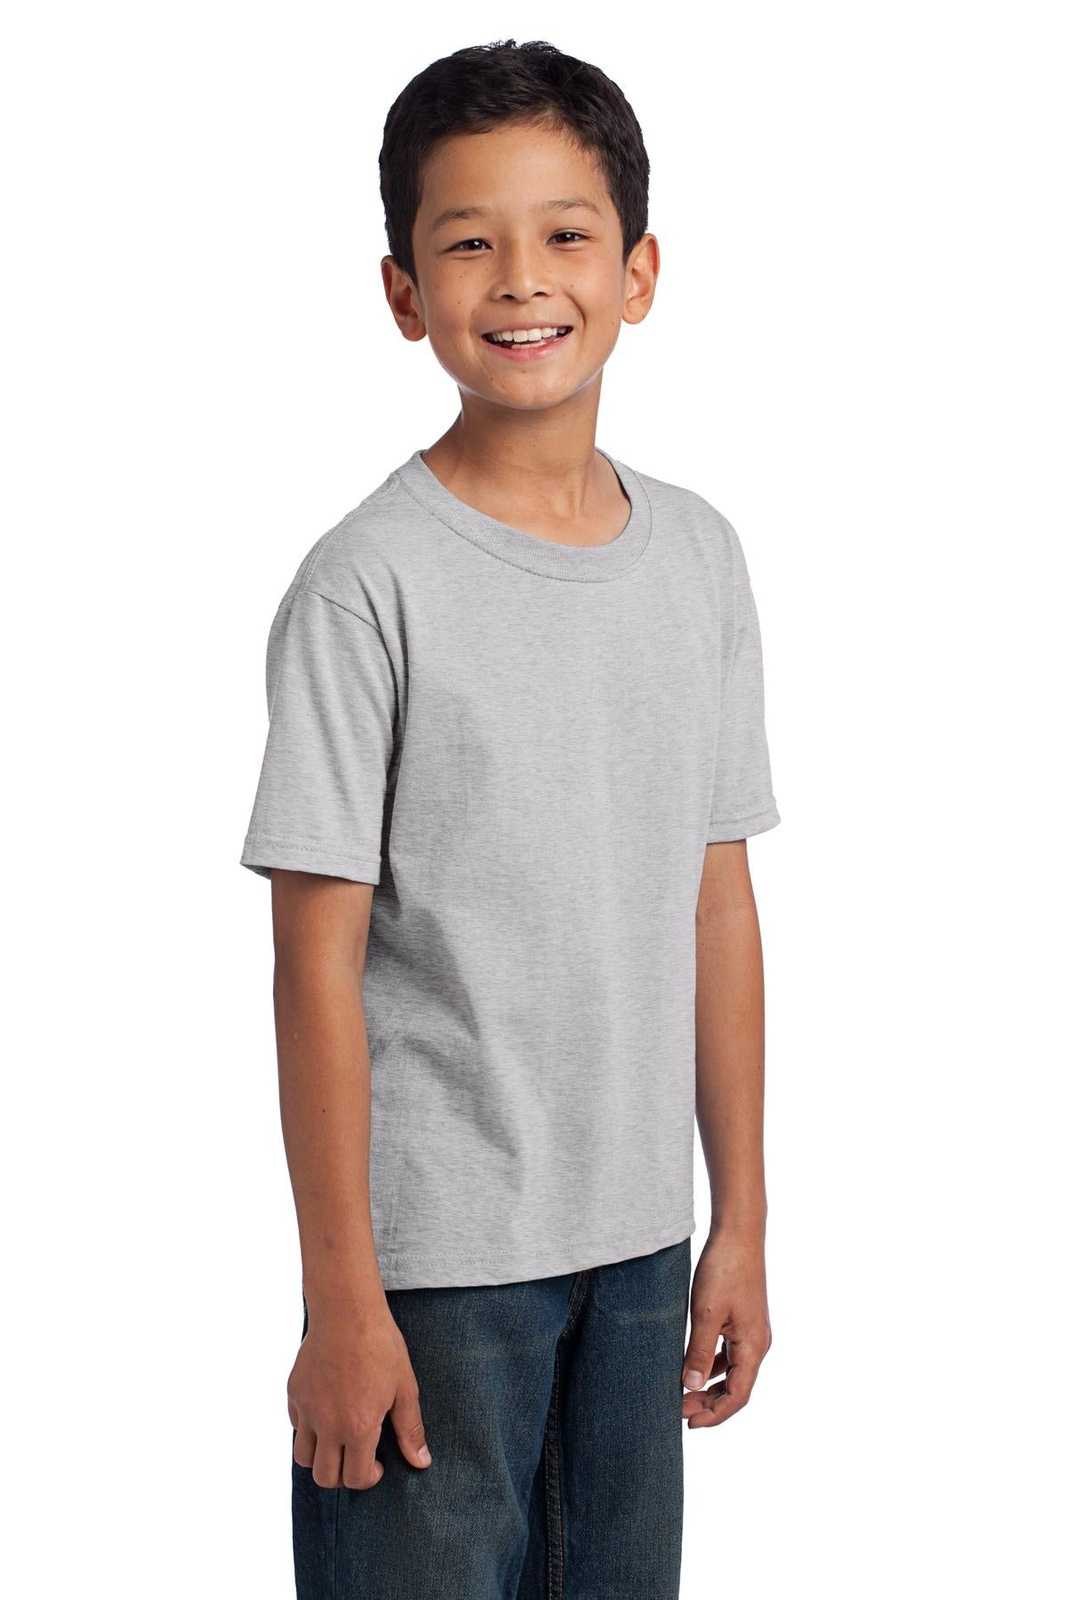 Fruit of the Loom 3930B Youth HD Cotton 100% Cotton T-Shirt - Athletic Heather - HIT a Double